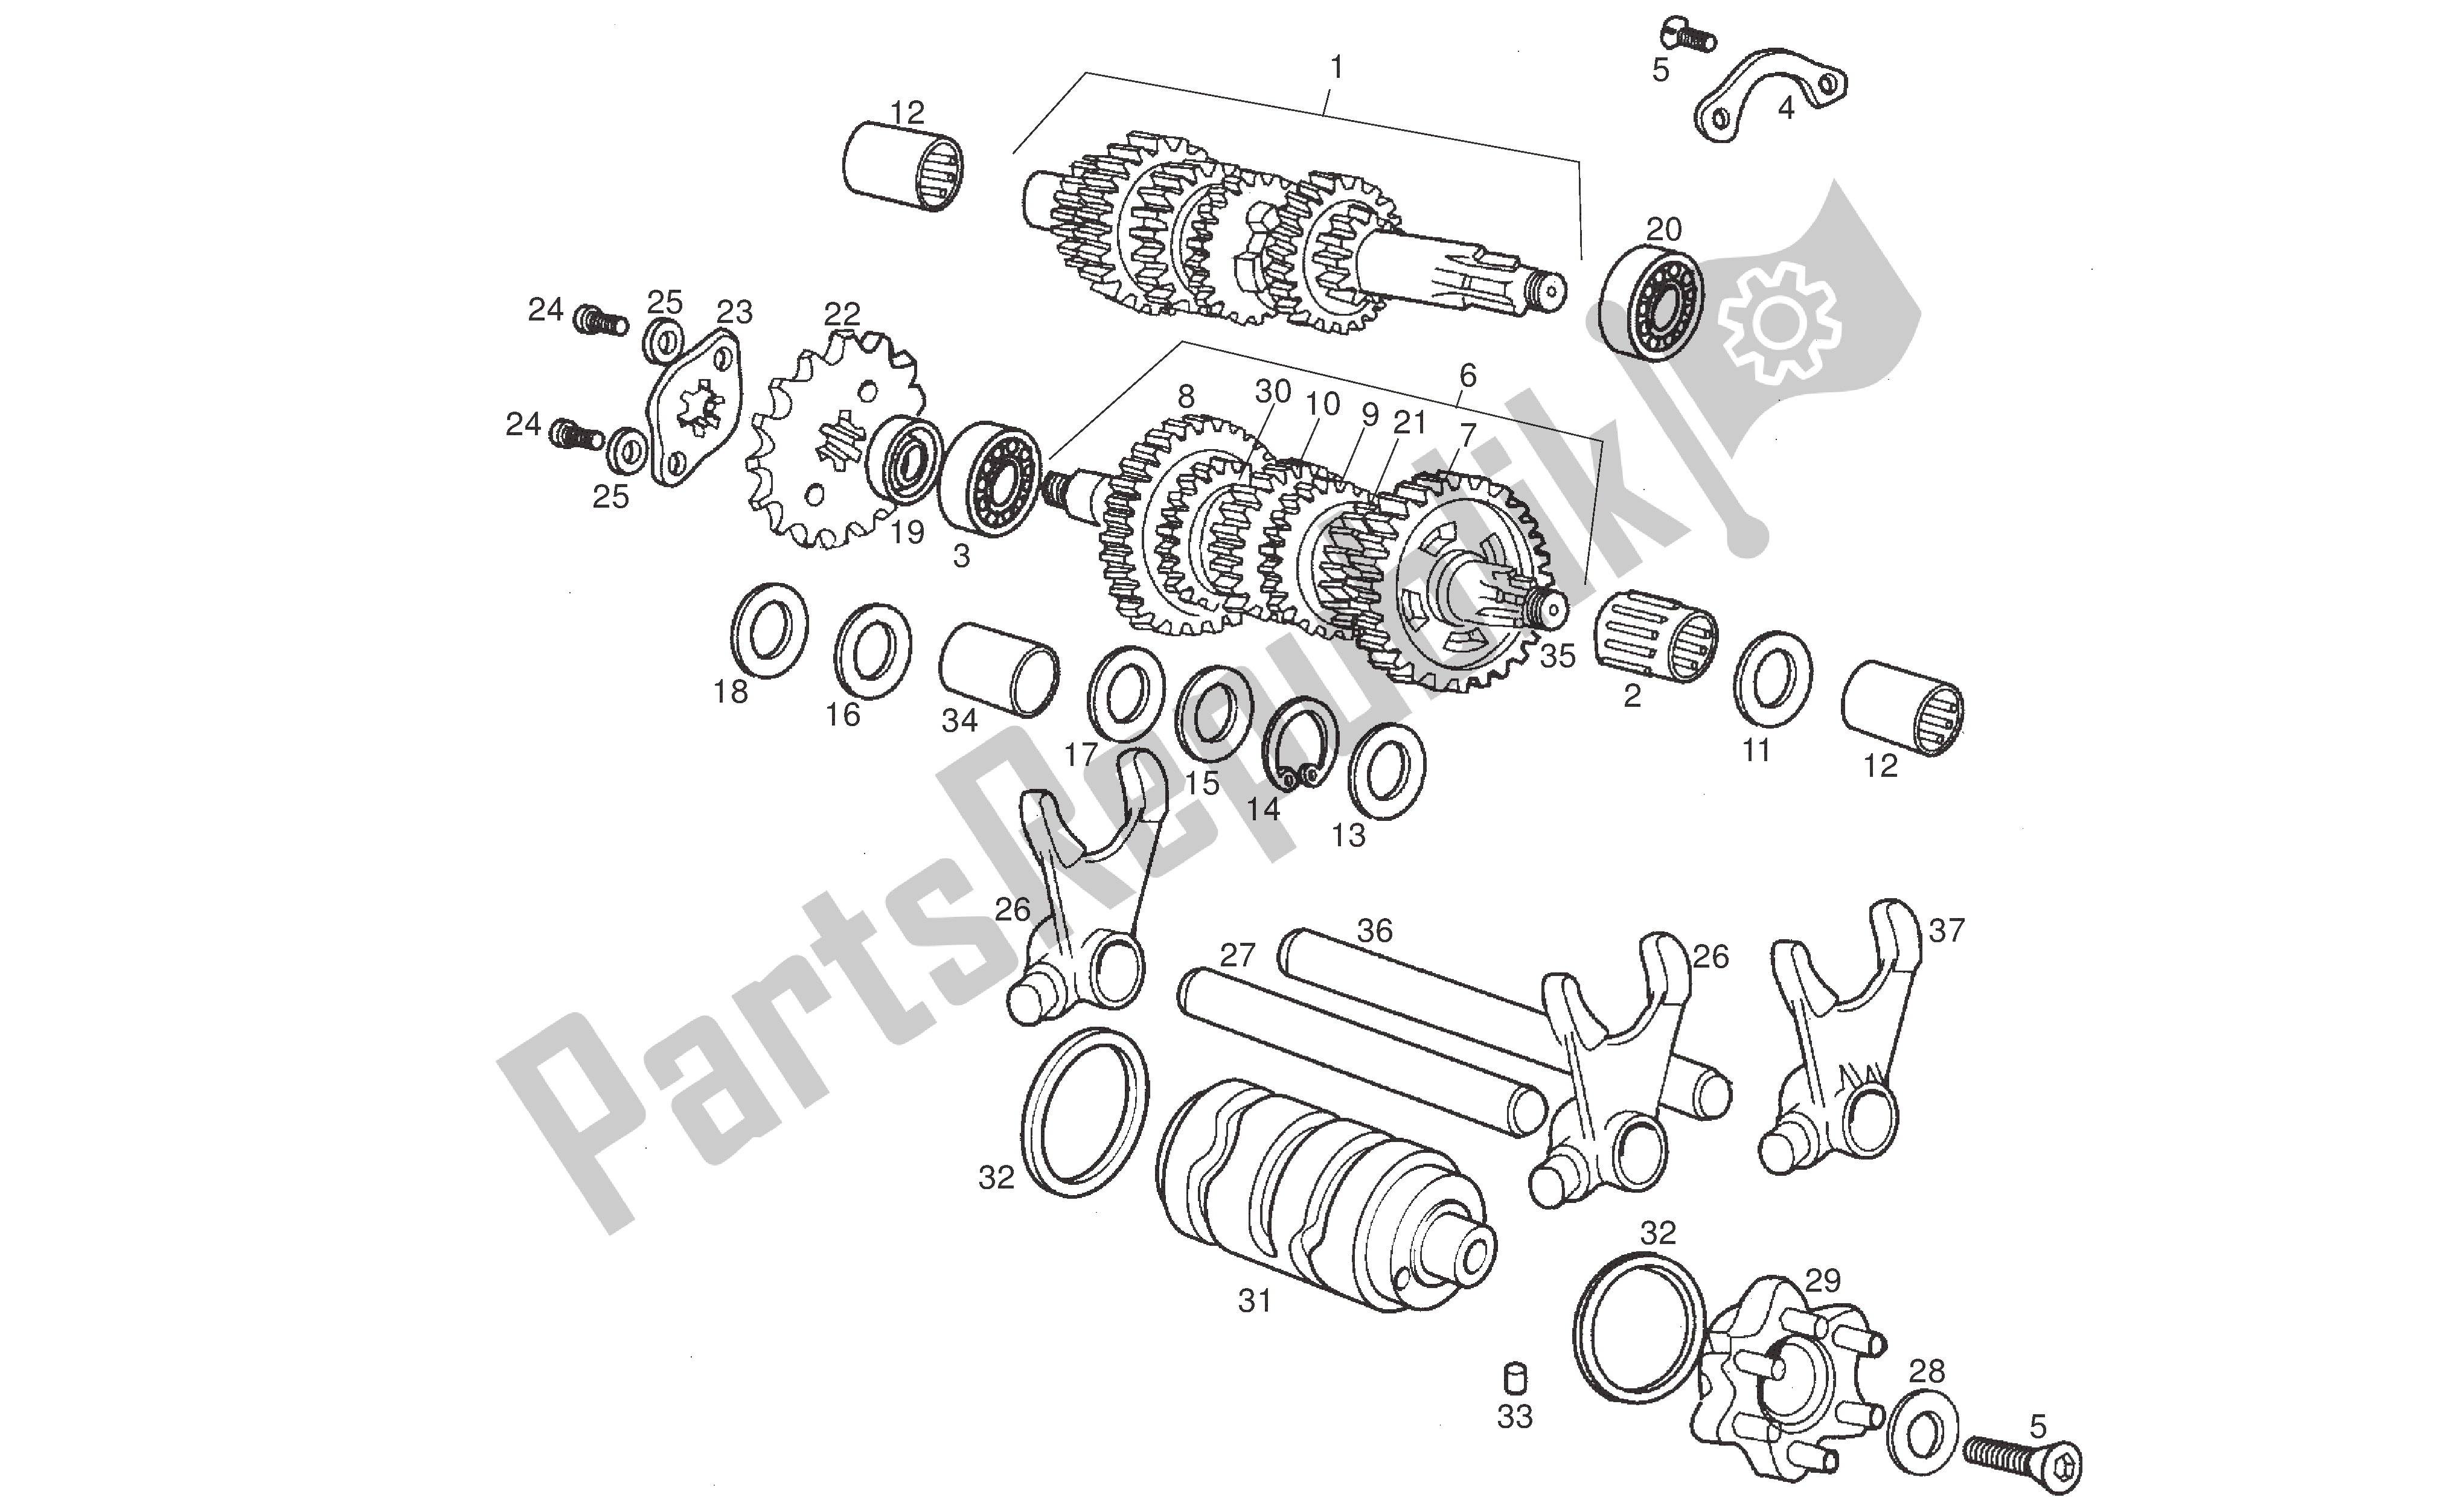 All parts for the Drive Shaft of the Derbi Senda R 50 2008